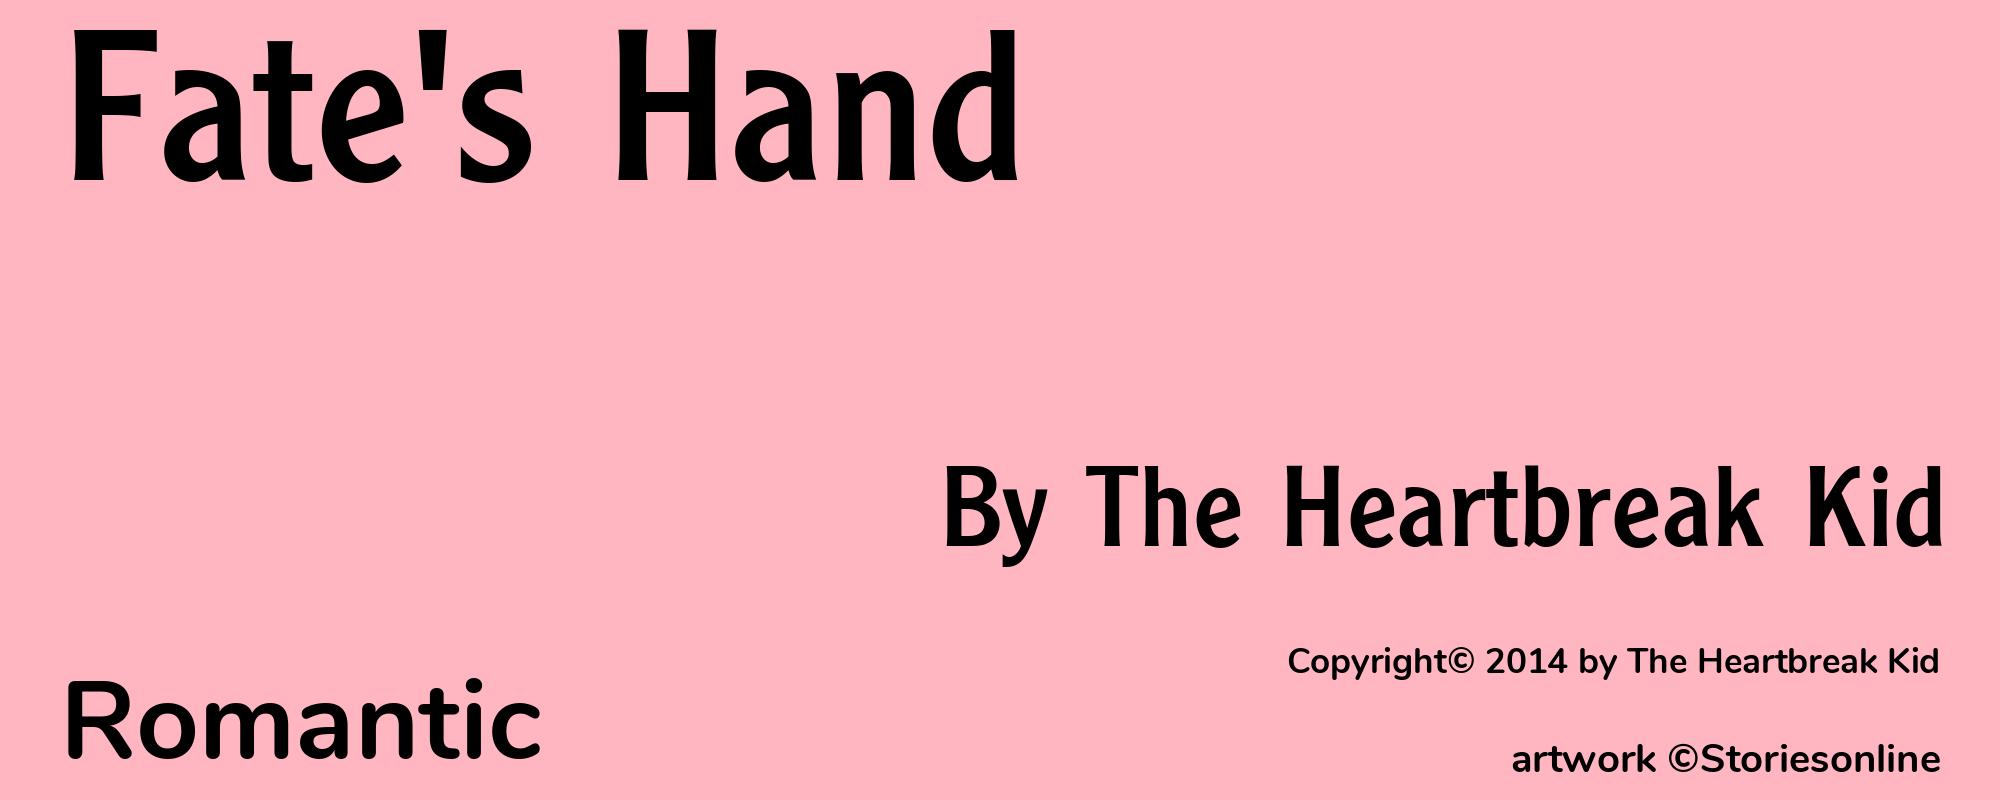 Fate's Hand - Cover